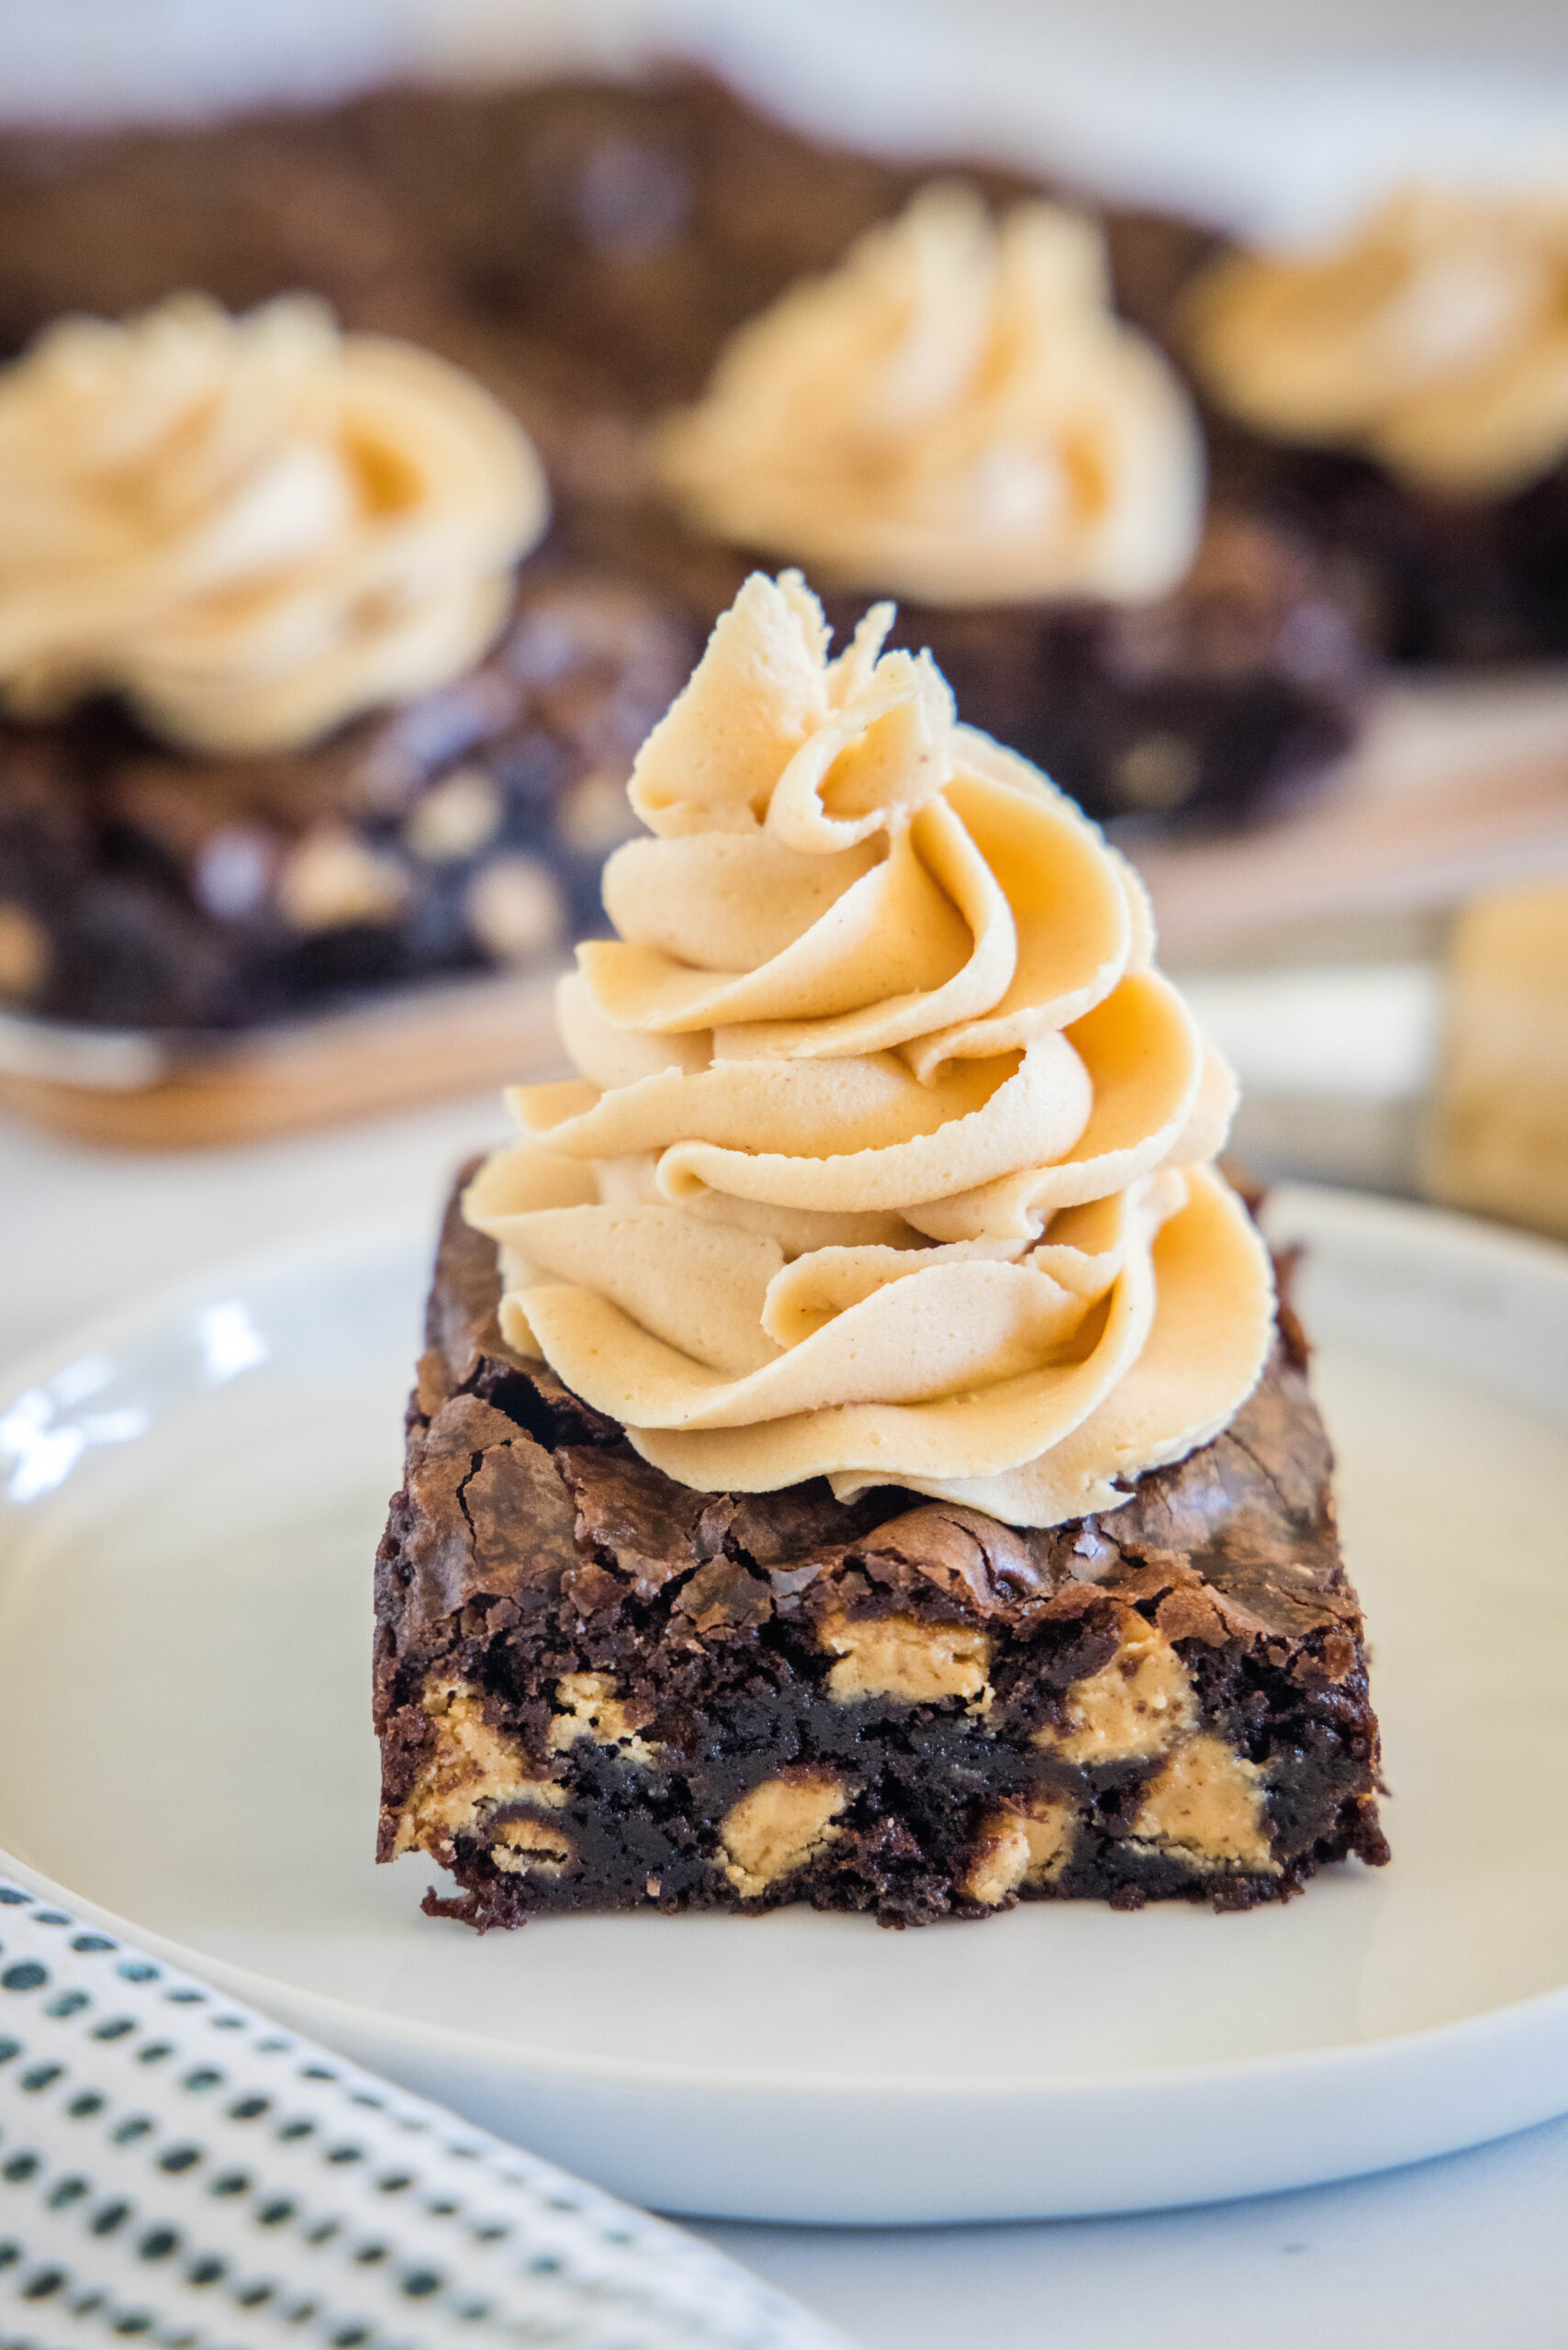 A chocolate brownie topped with a swirl of peanut butter frosting on a plate, with more frosted brownies in the background.